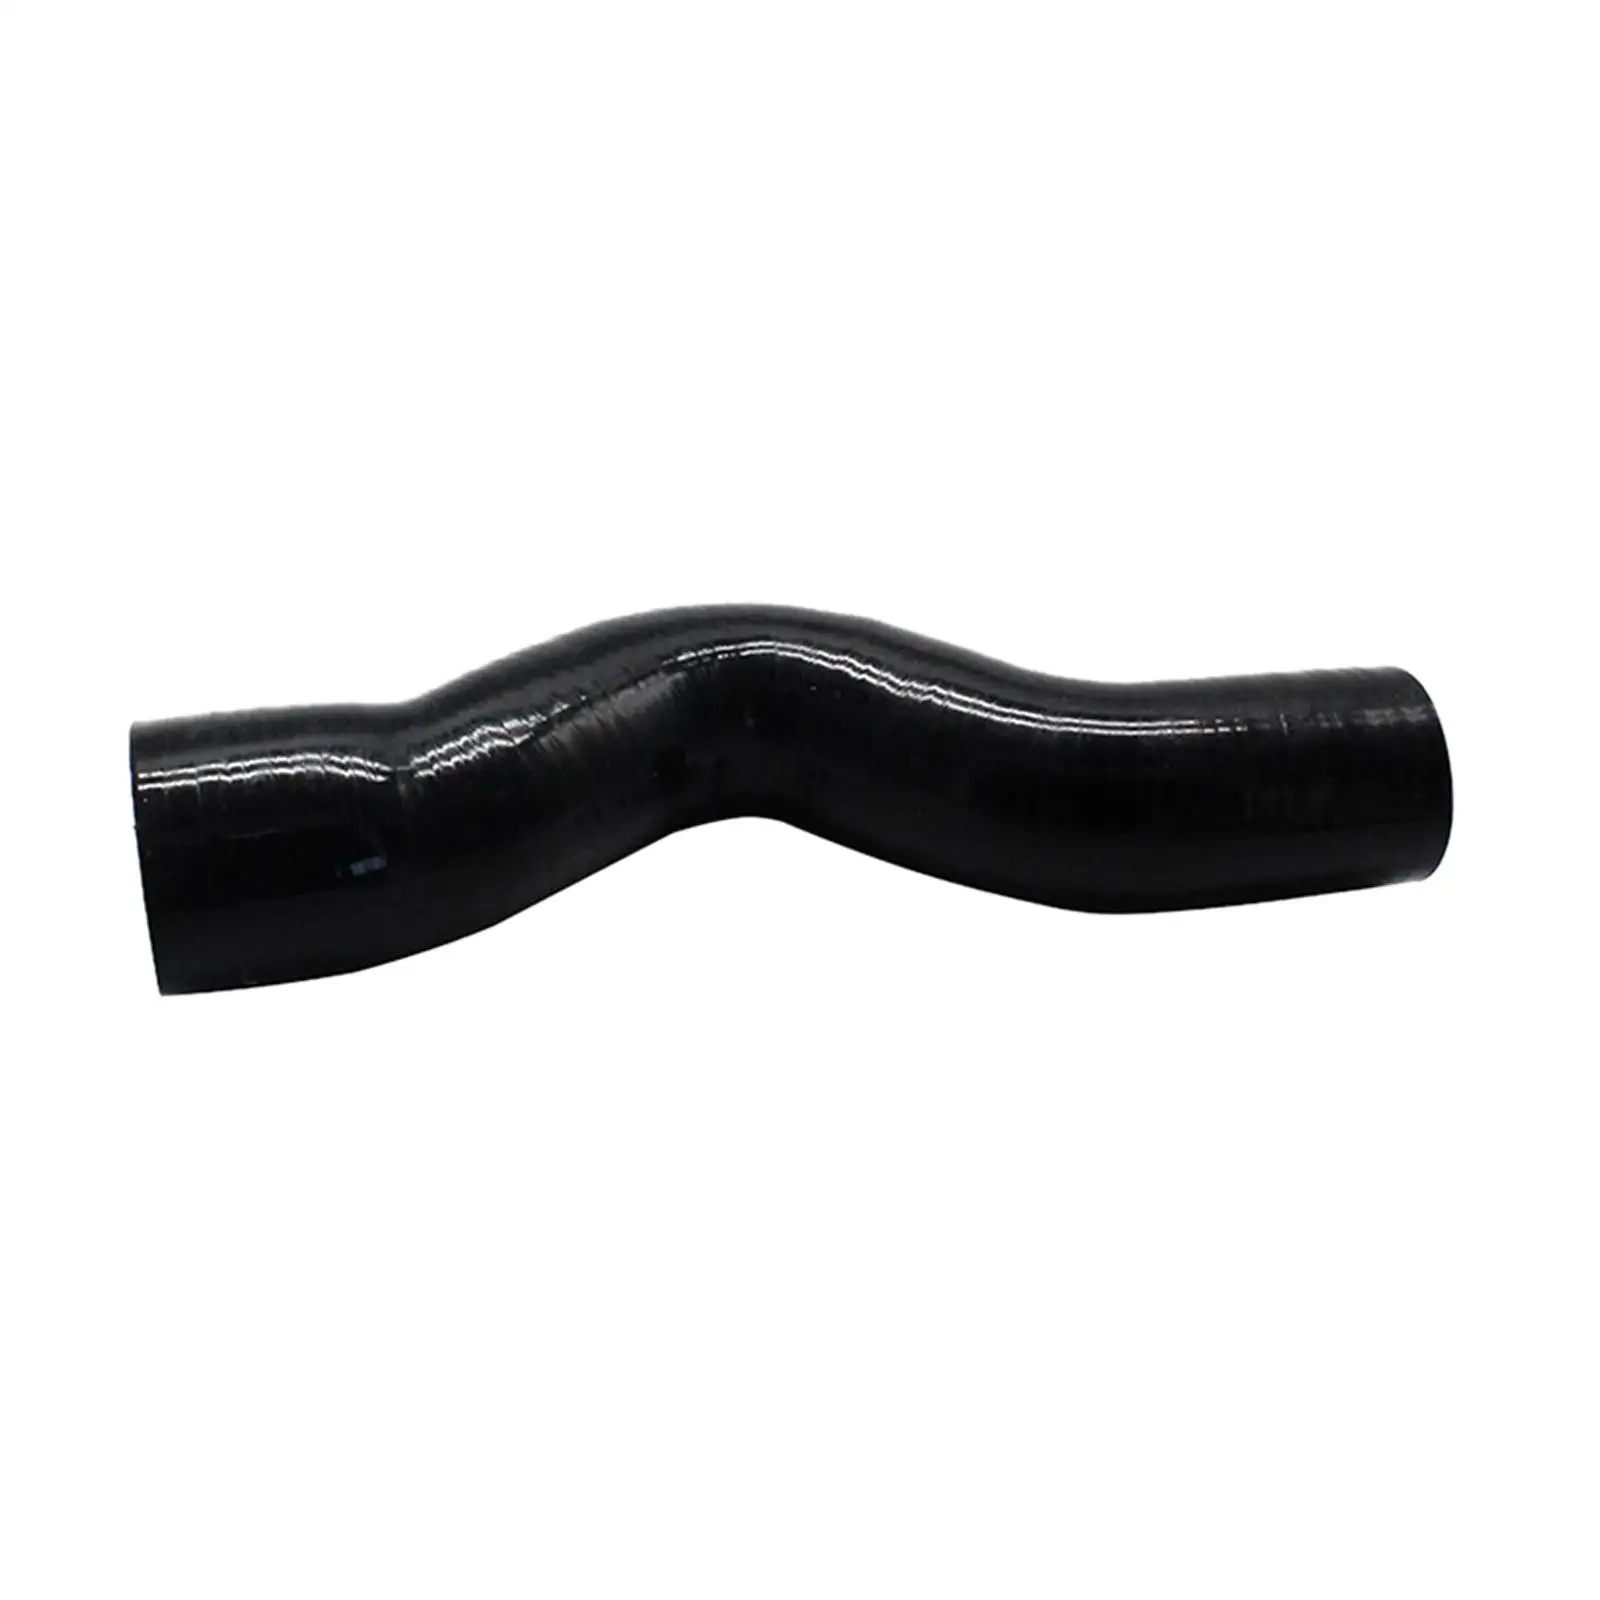 Vehicle Intercooler Turbo Hose 1596810 Spare Parts Accessory Direct Replaces Professional Durable Black Color